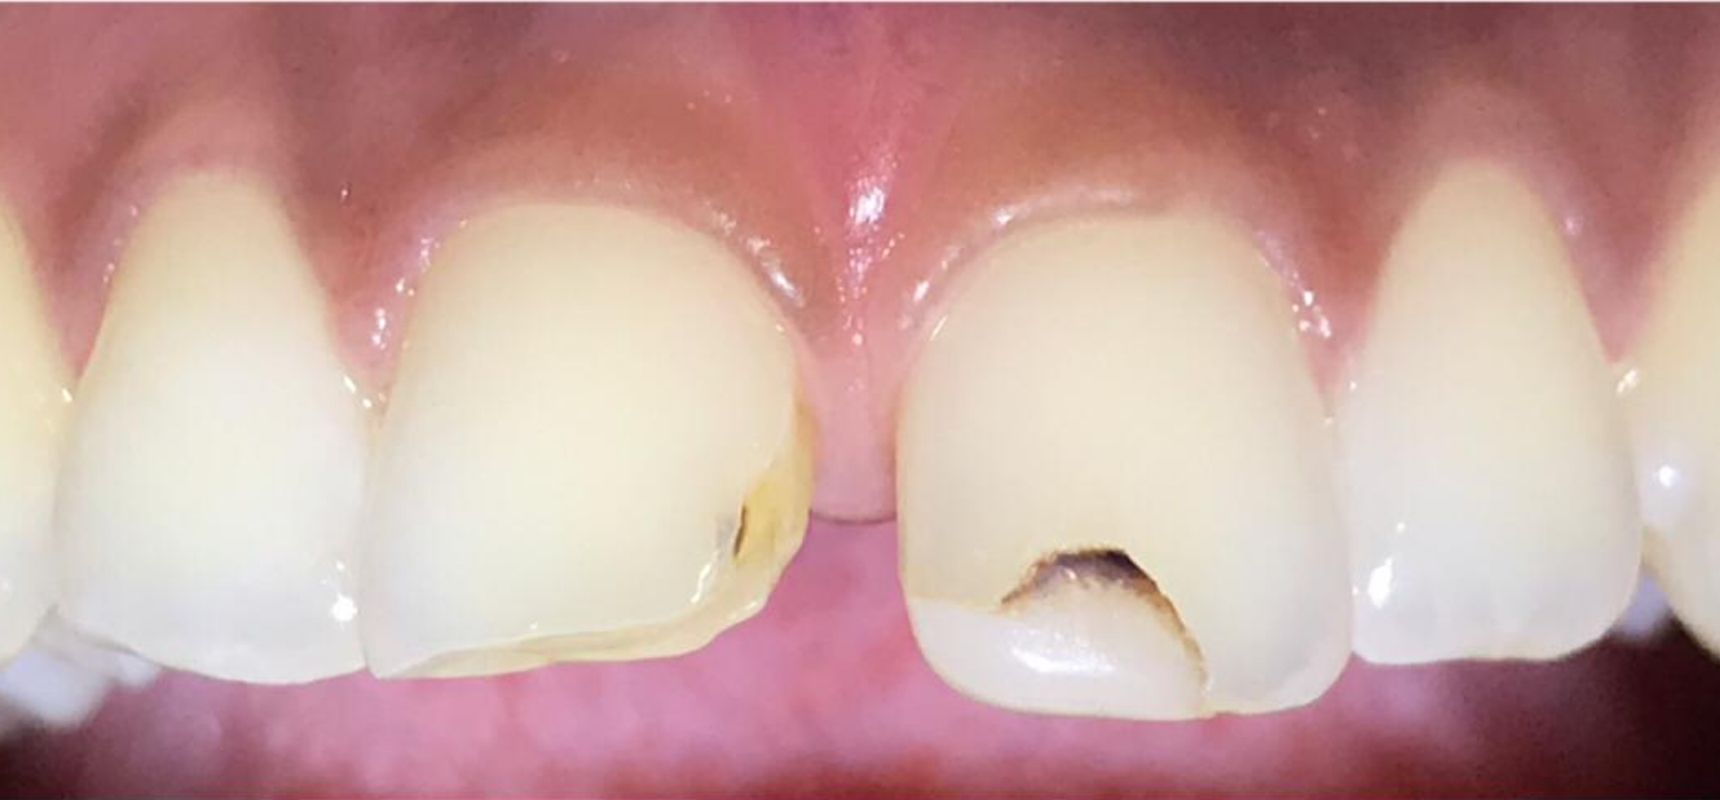 Before-Composite filling to close midline diastema and teeth length adjustment